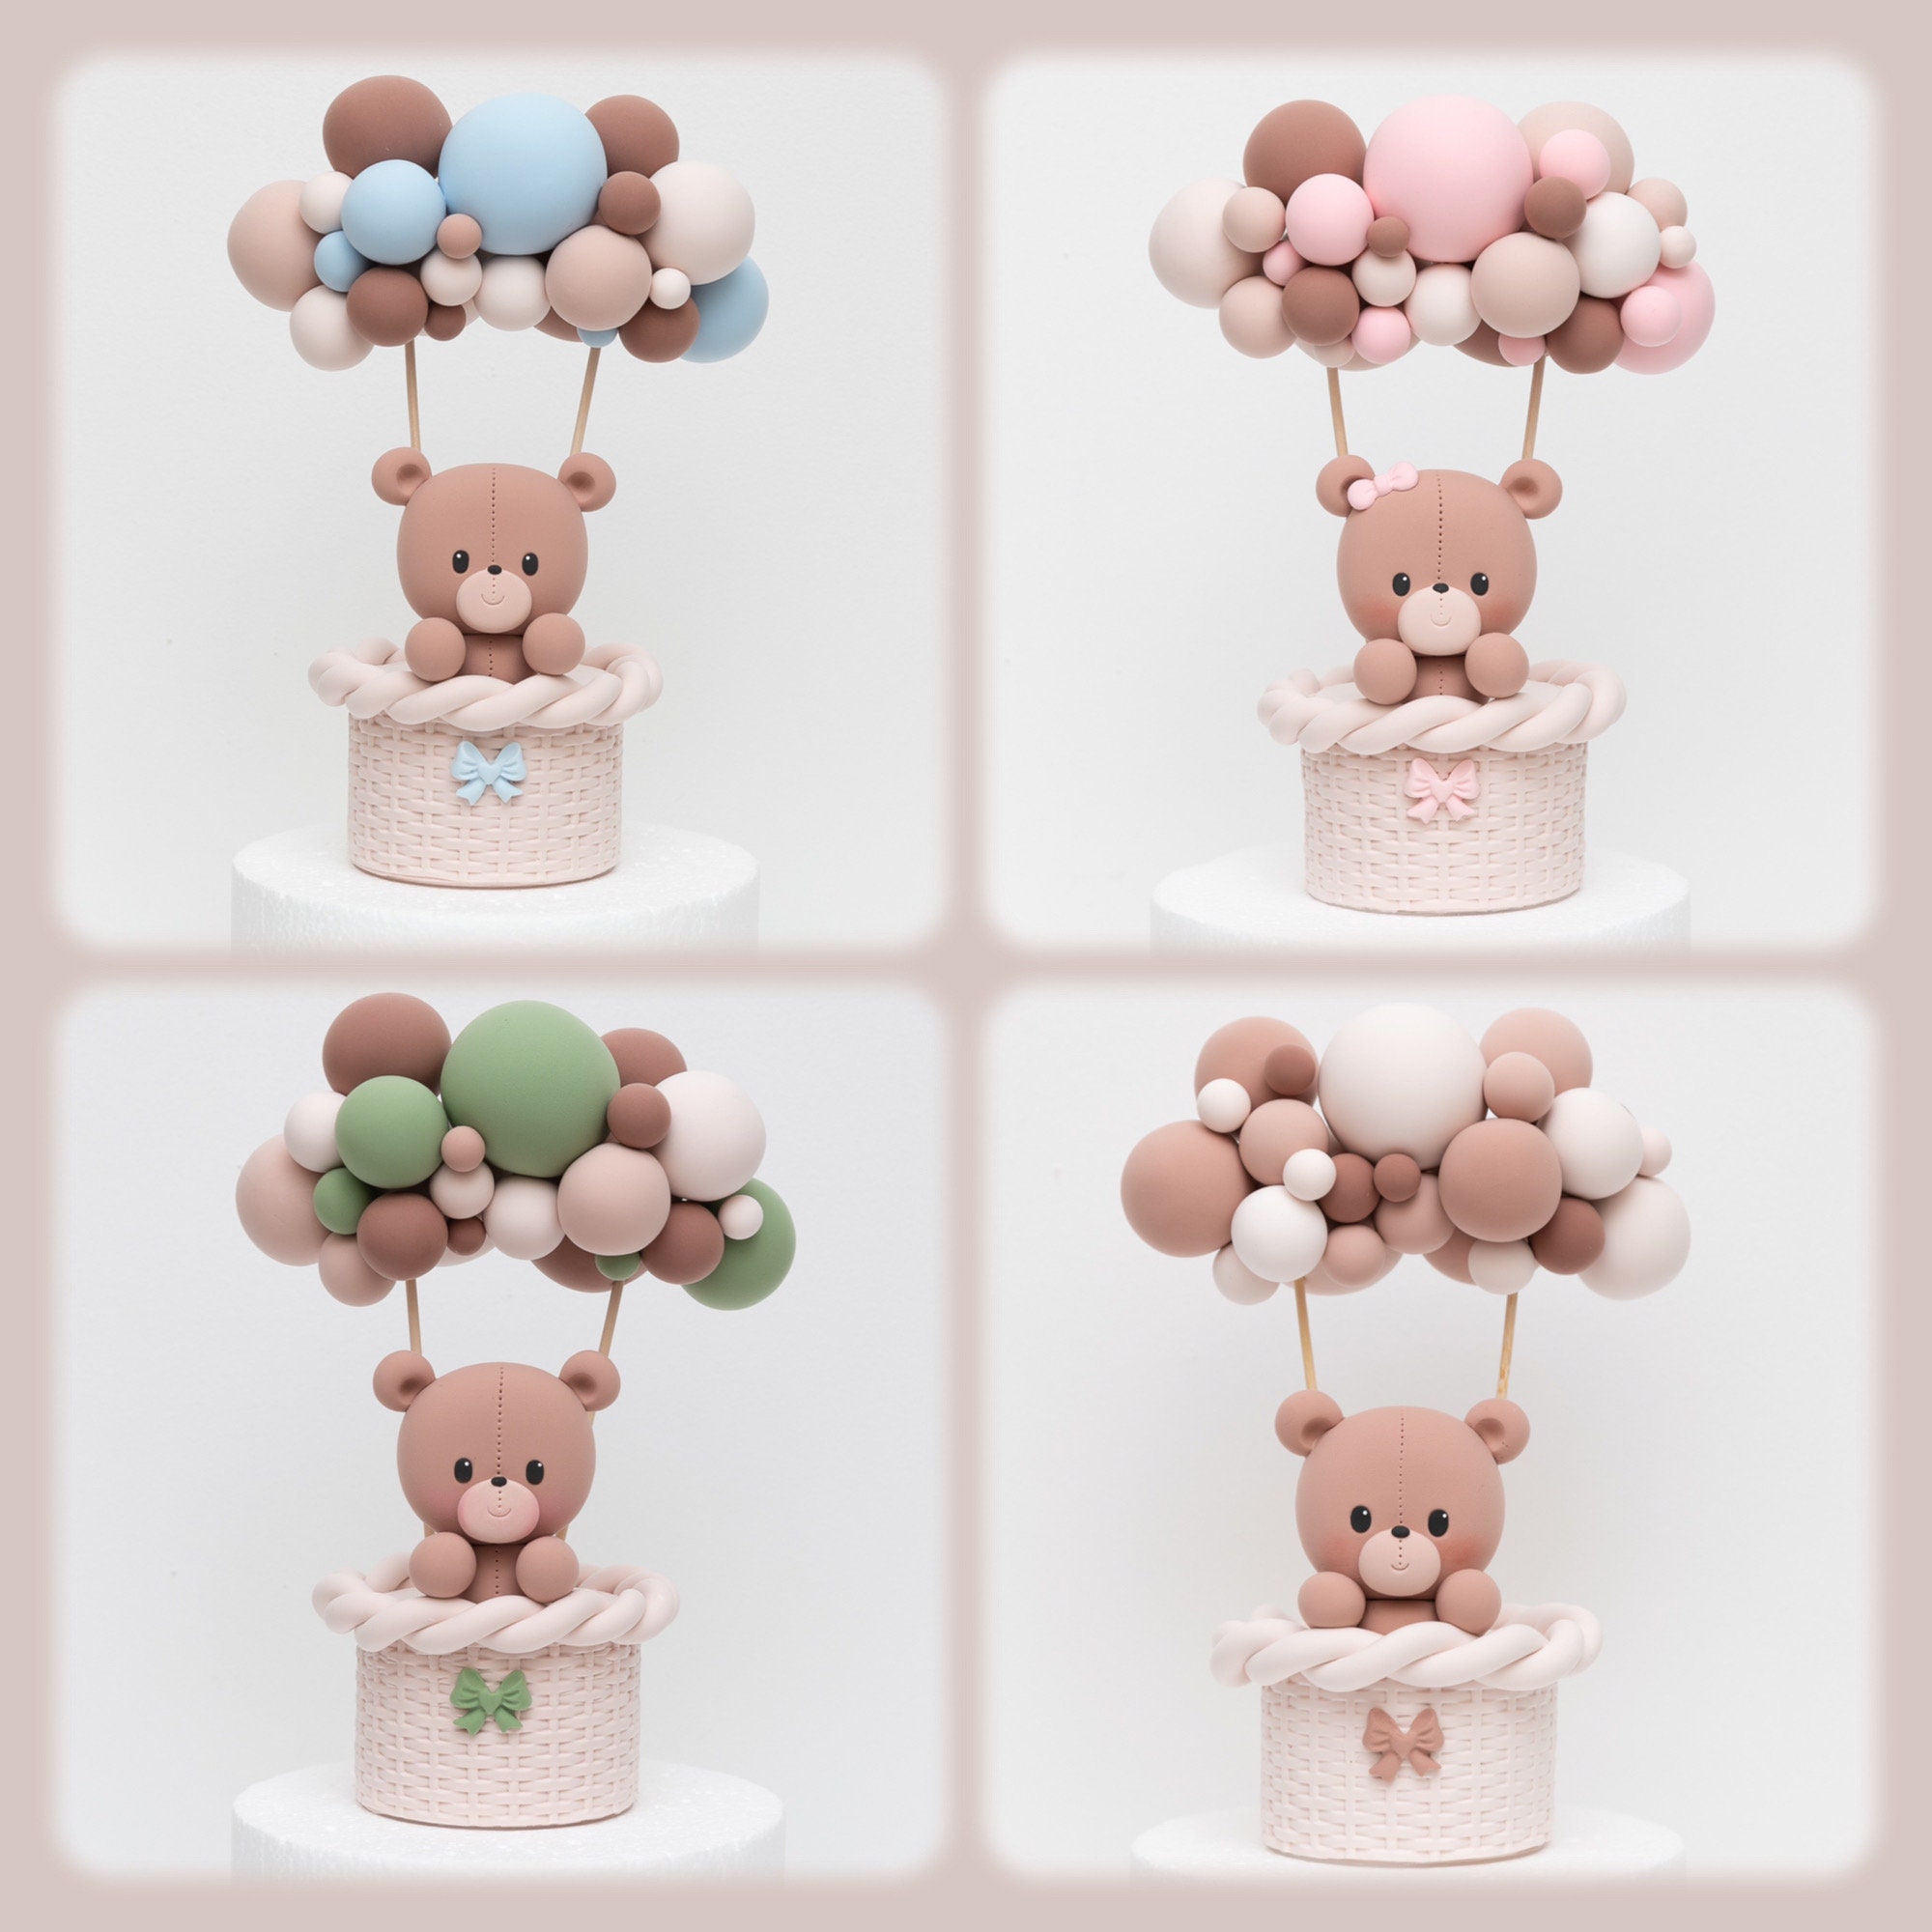 Cute Fondant 3 Teddy Bears Cake Topper Set, Clouds and Little Hot Air  Balloons, Block Letters BABY, 3D Edible Cake Decoration, Personalized 